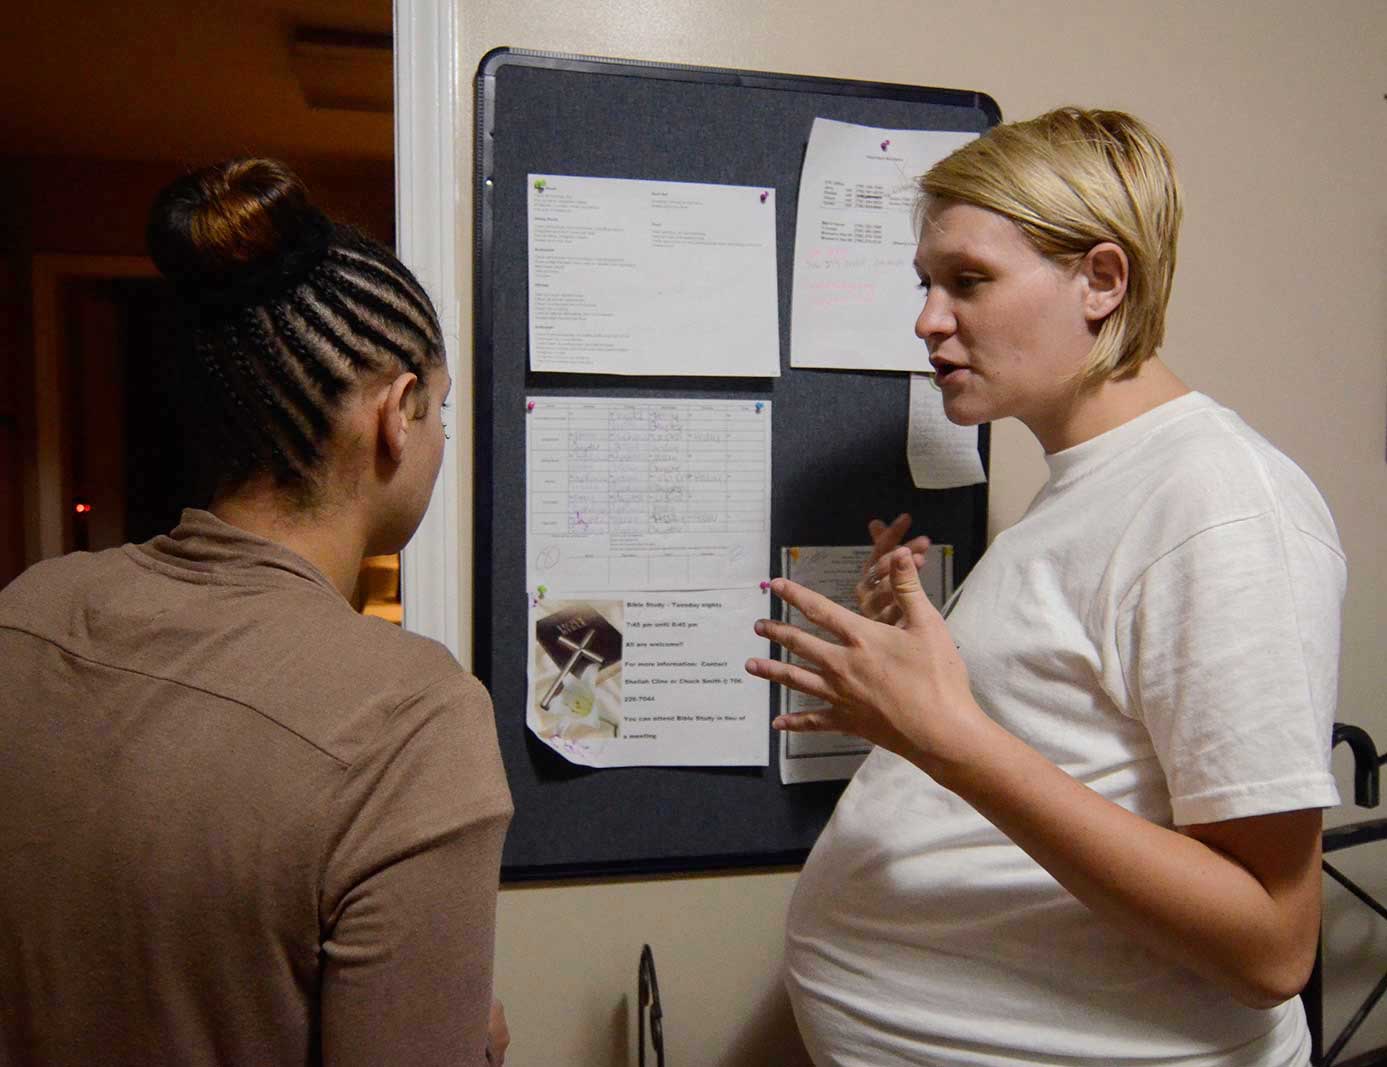 Stephanie, right, shows Dominique the chore list, just hours after Dominique's arrival at the Carter Hope Center.